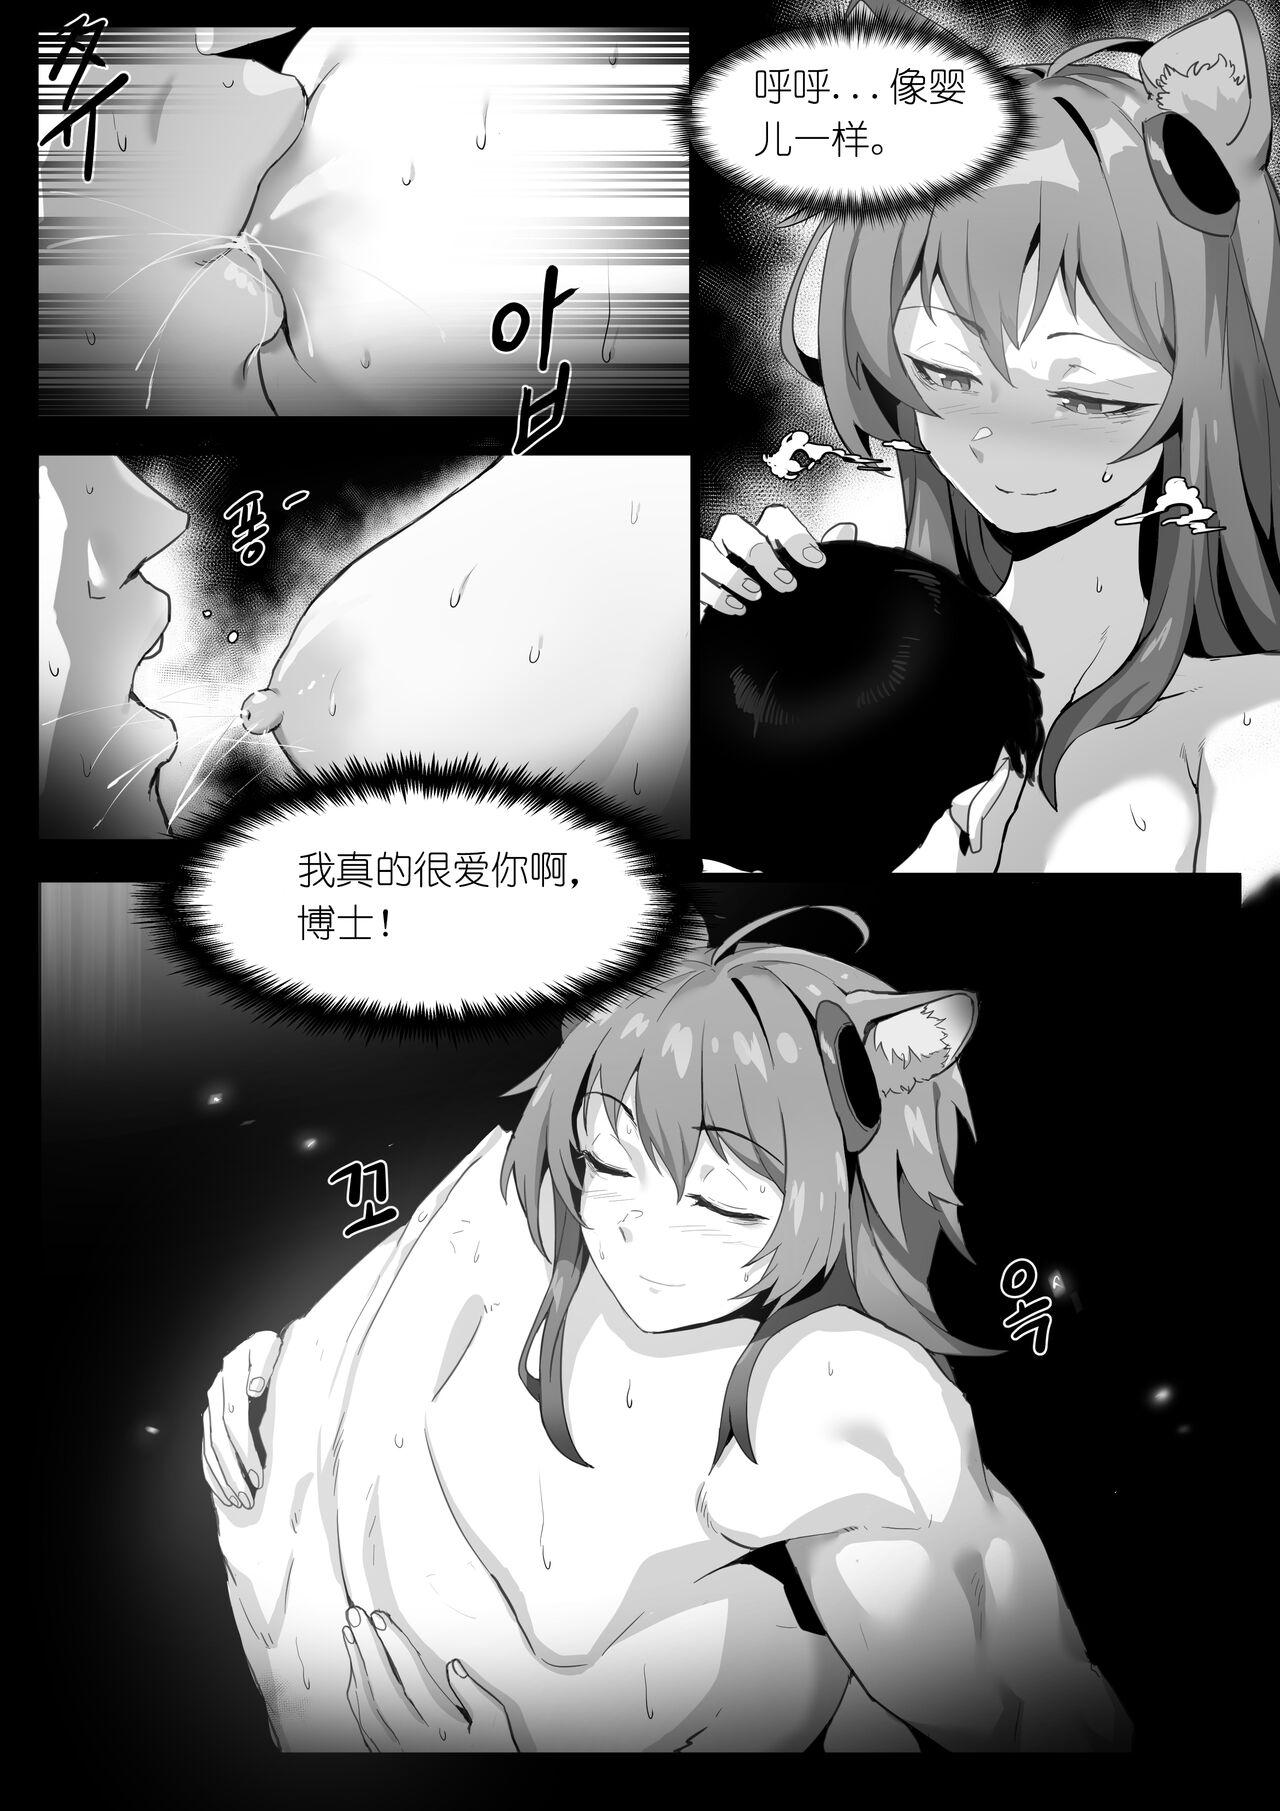 Pounded 欲望方舟记录3 - Arknights Lesbiansex - Page 3